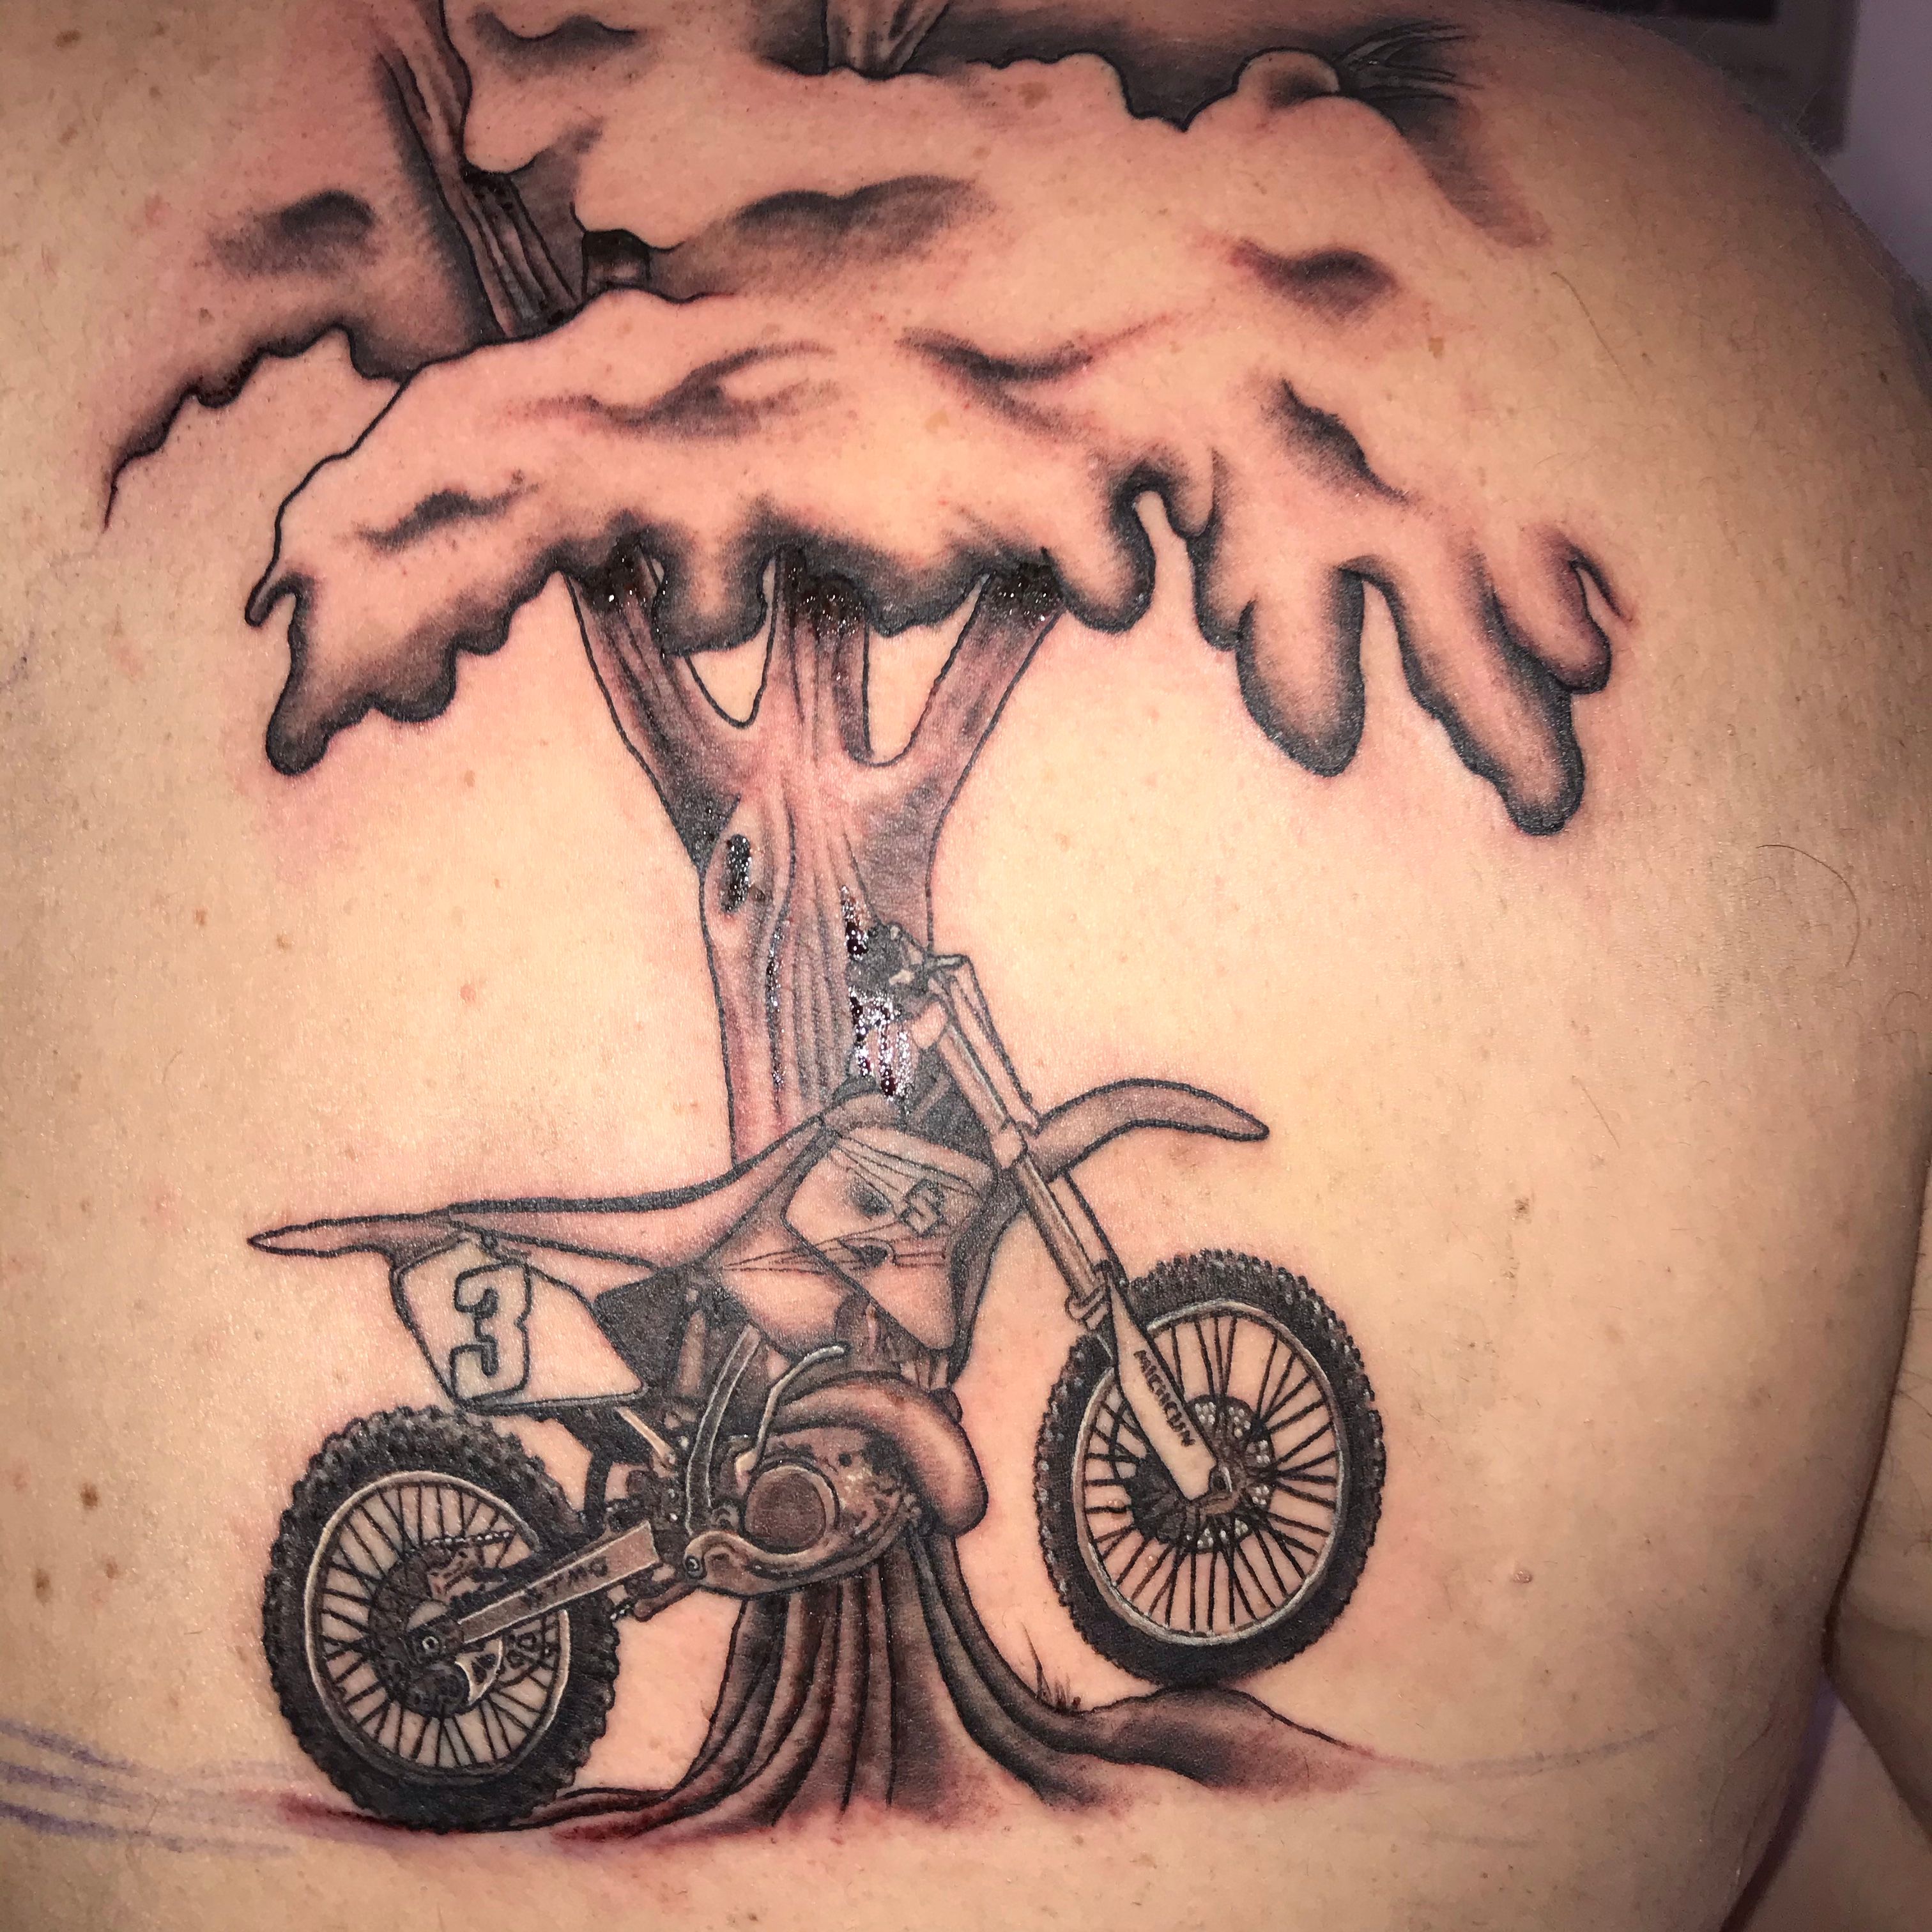 king of tattoo arts on Instagram Tag to bikelover biketattoo  cont8660919009